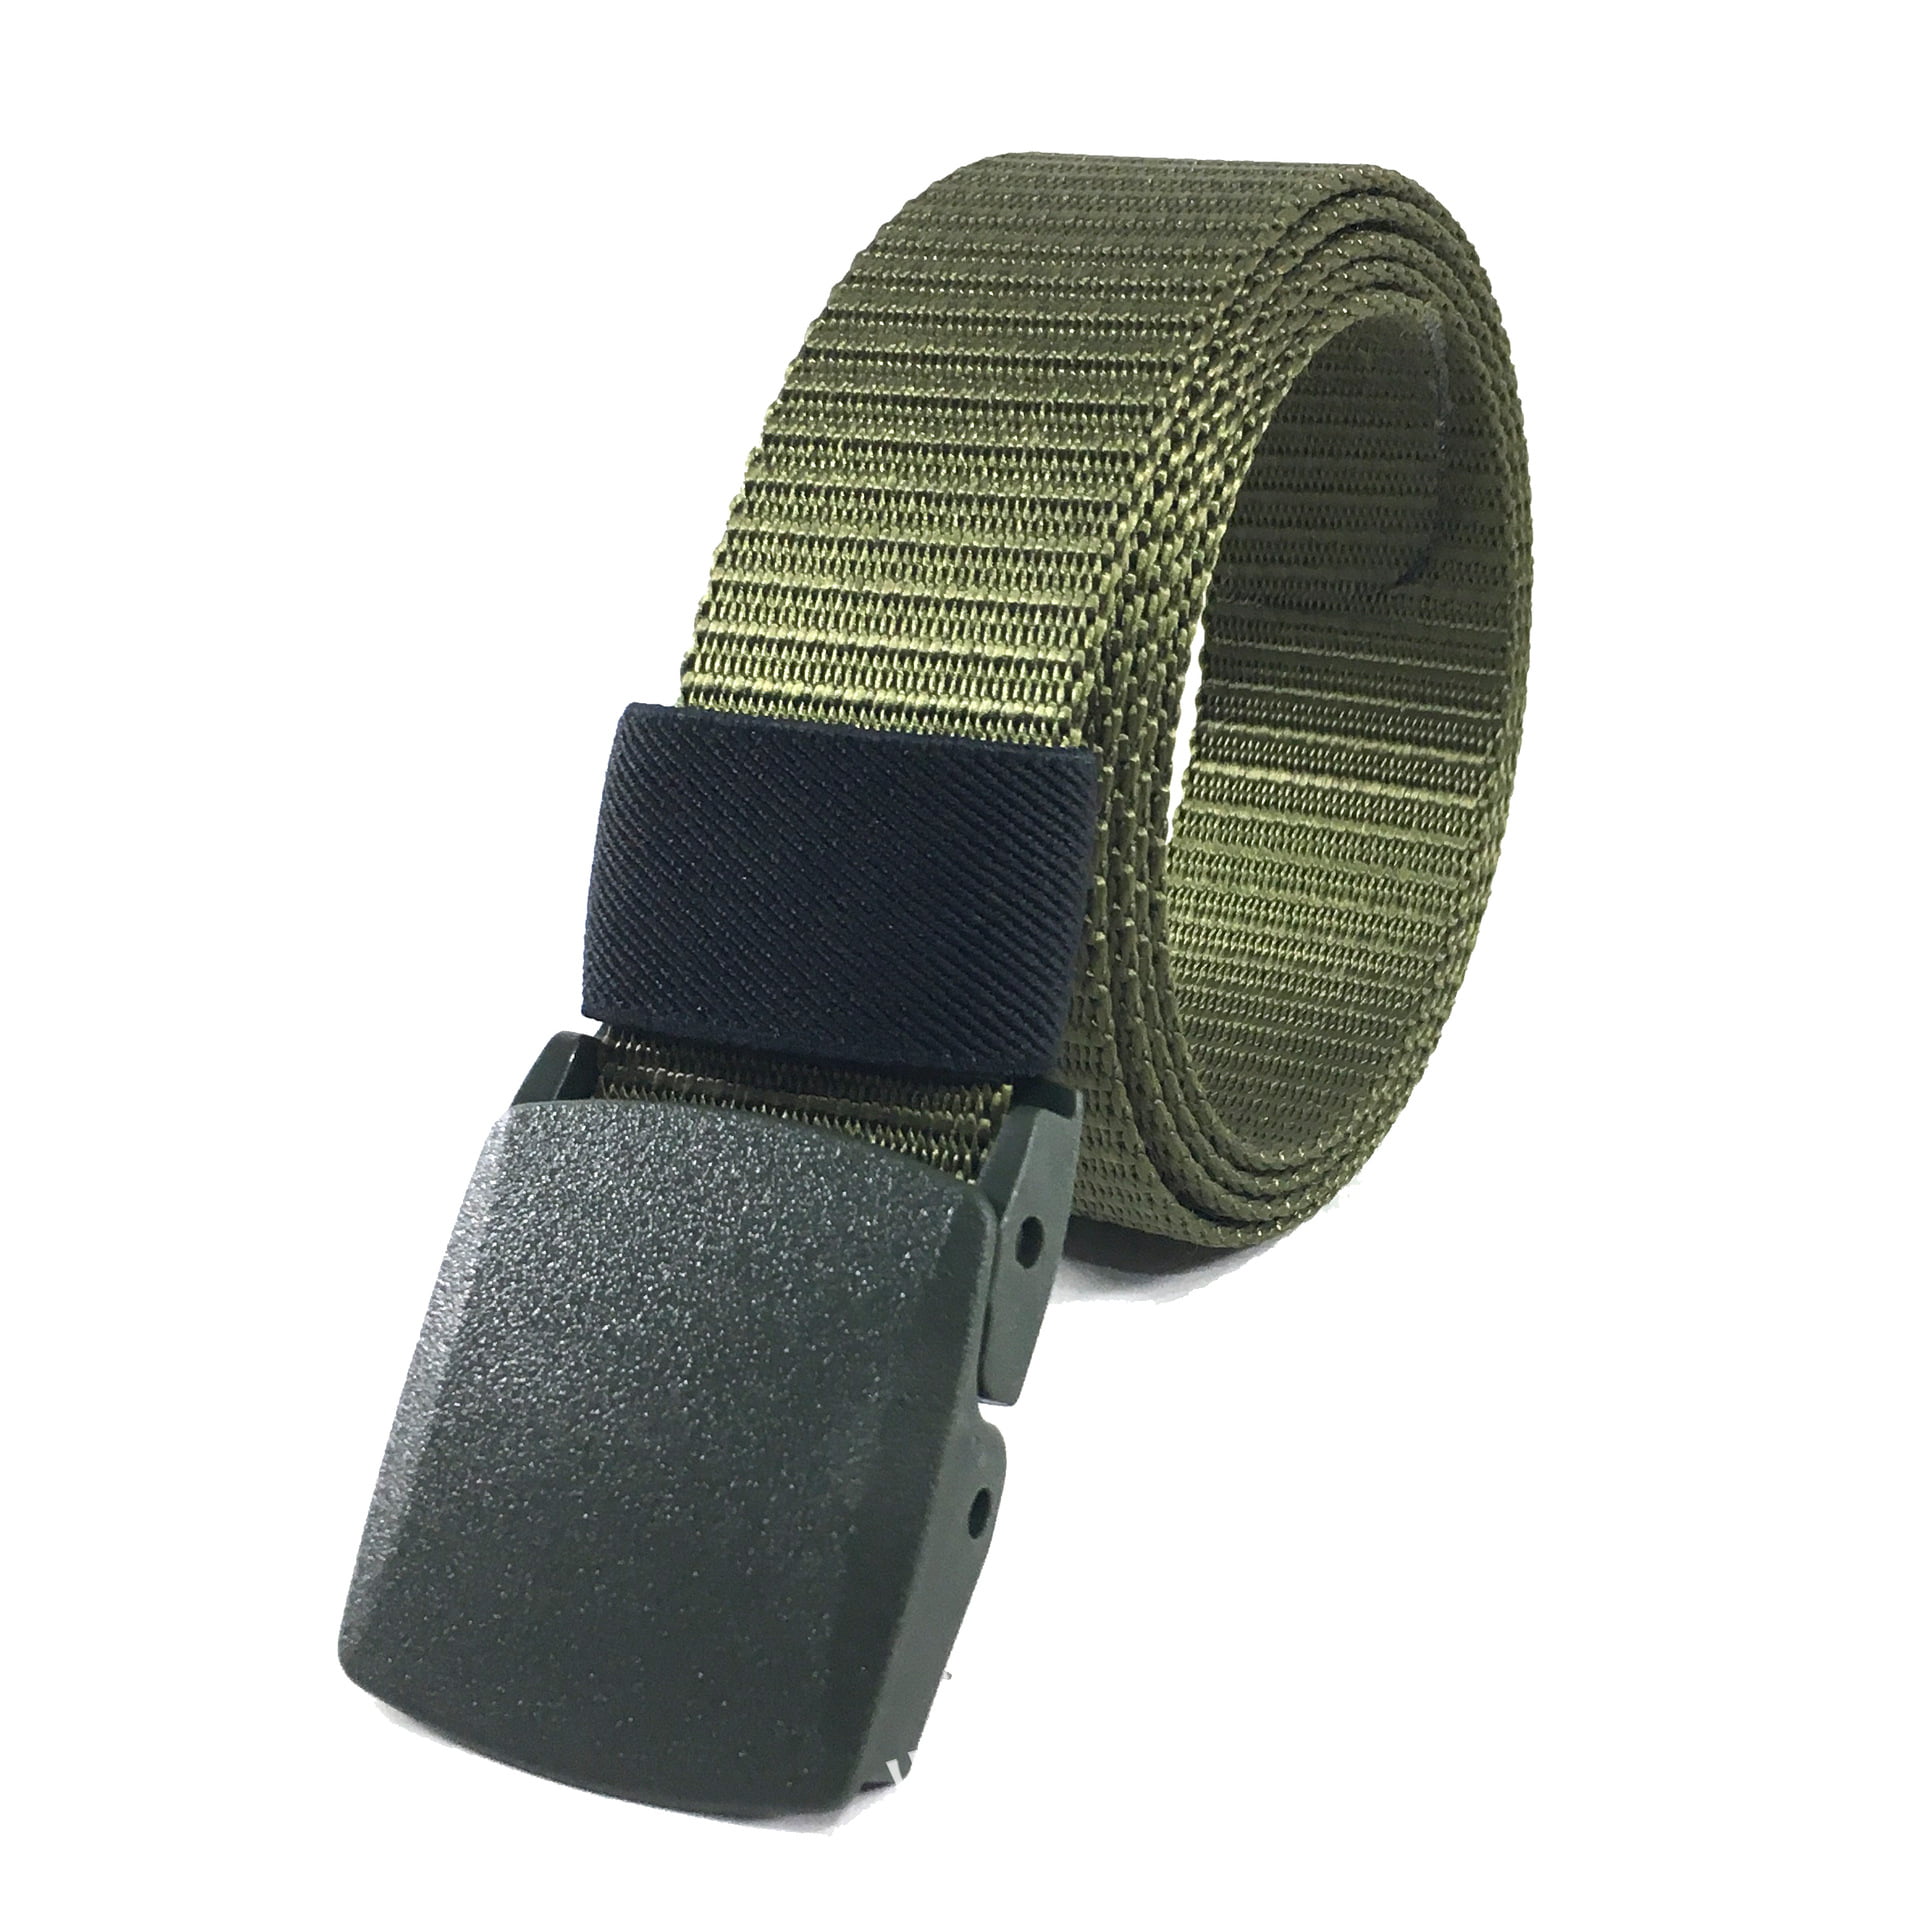 Womens Canvas Belts Nylon Military Tactical Wrap Belt With Medal Buckle Candy color 